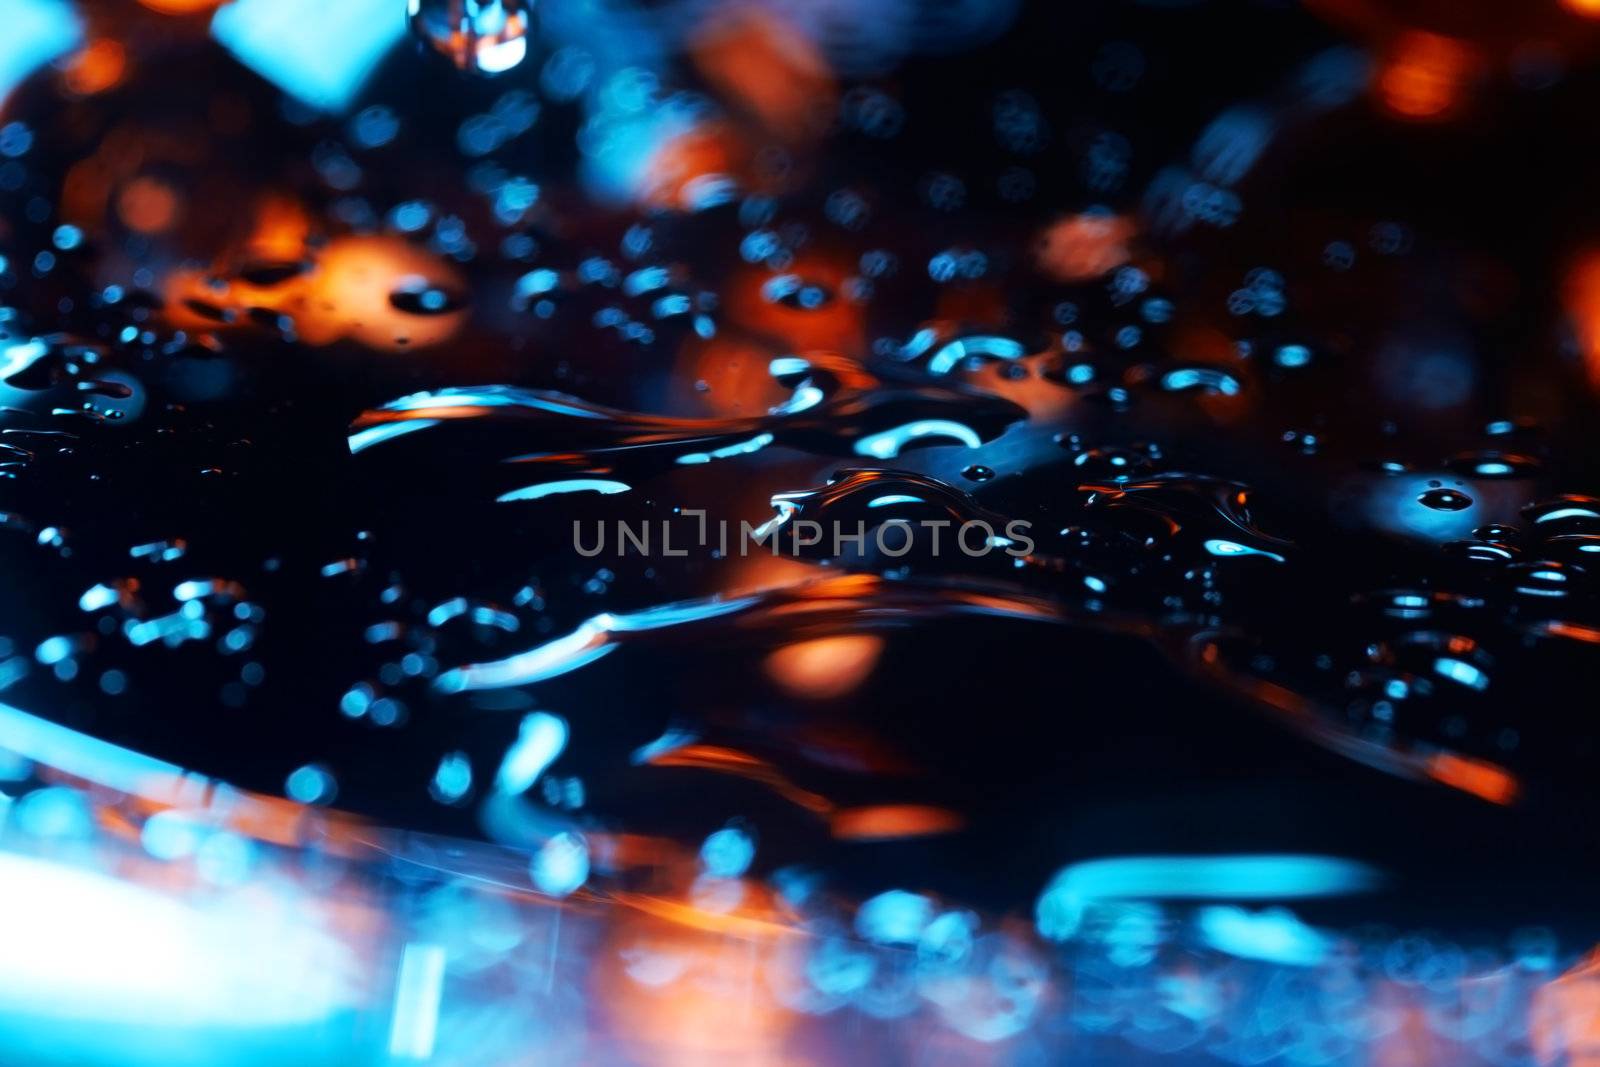 Abstract close-up photo of the colorful liquid surface